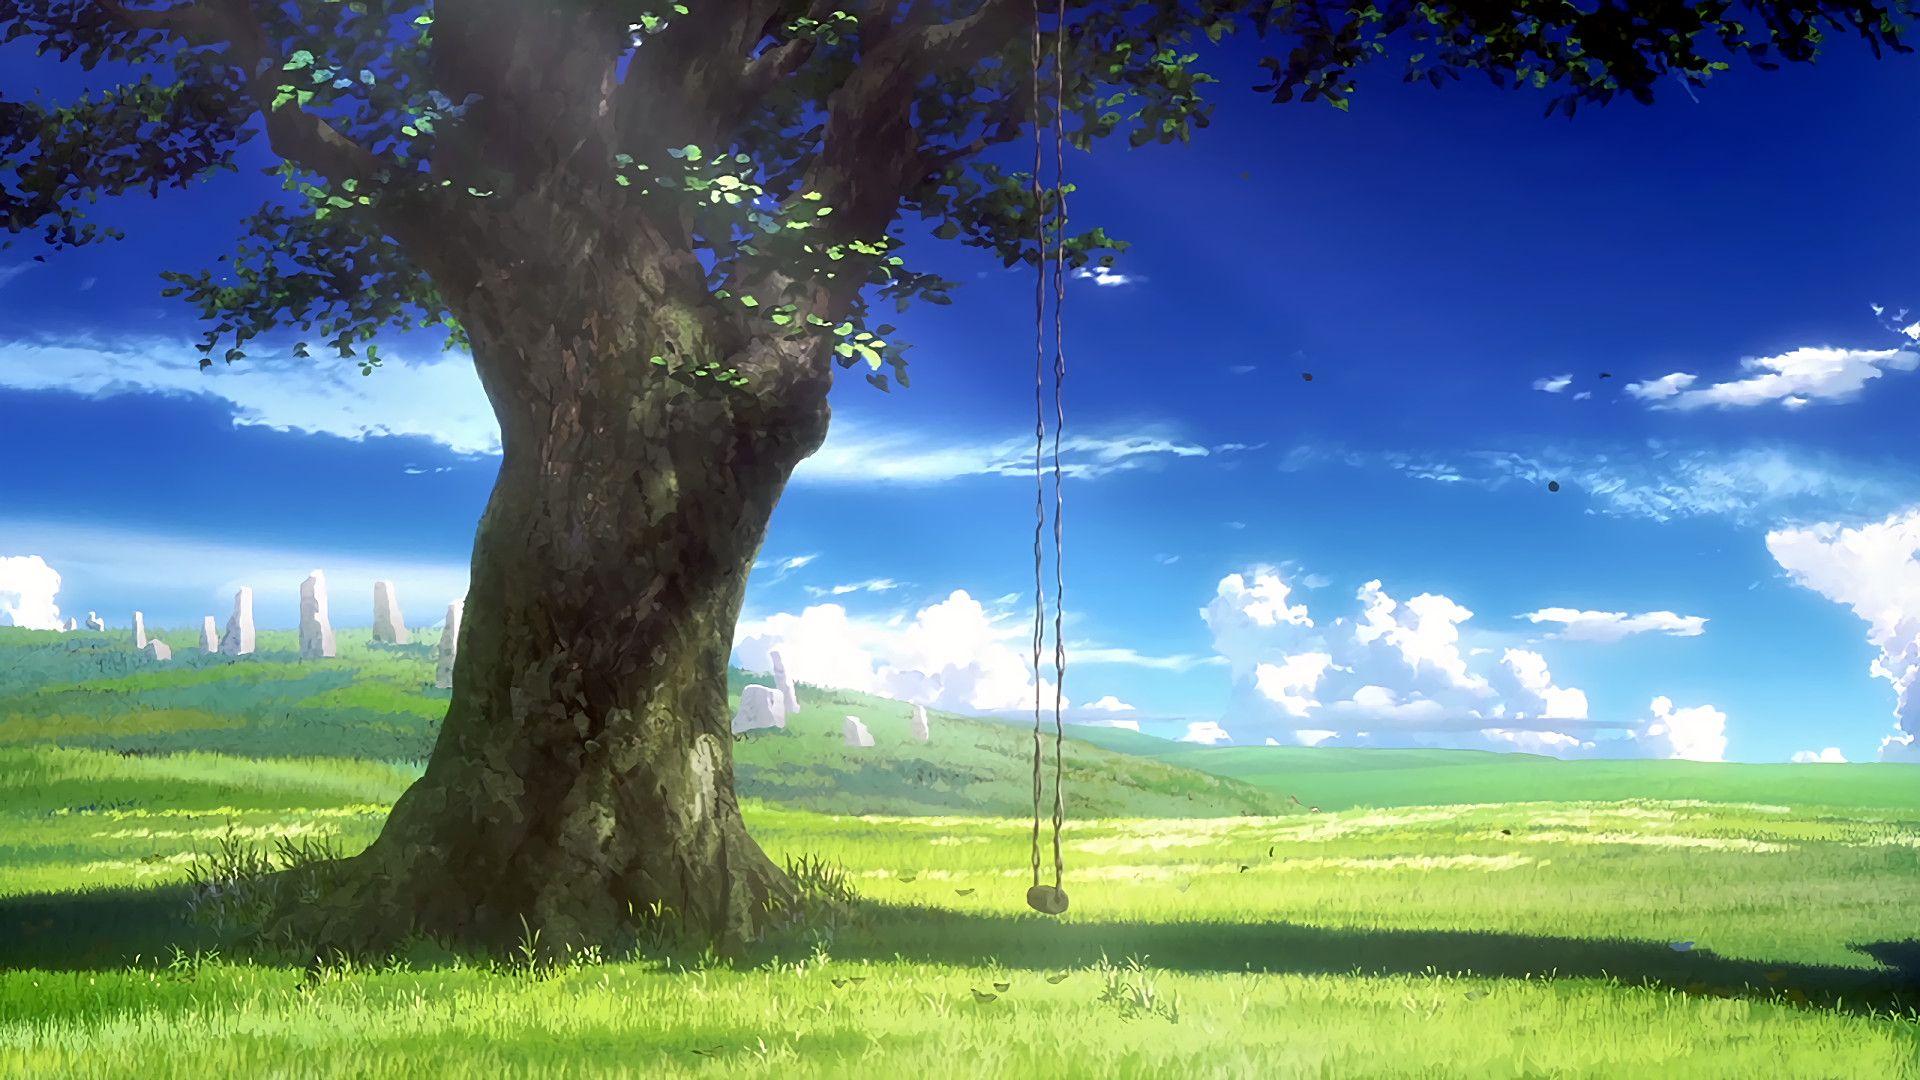 HD Wallpaper. Background. 1920x1080 Anime Shelter 1920x1080. Anime scenery, Anime background, Anime background wallpaper